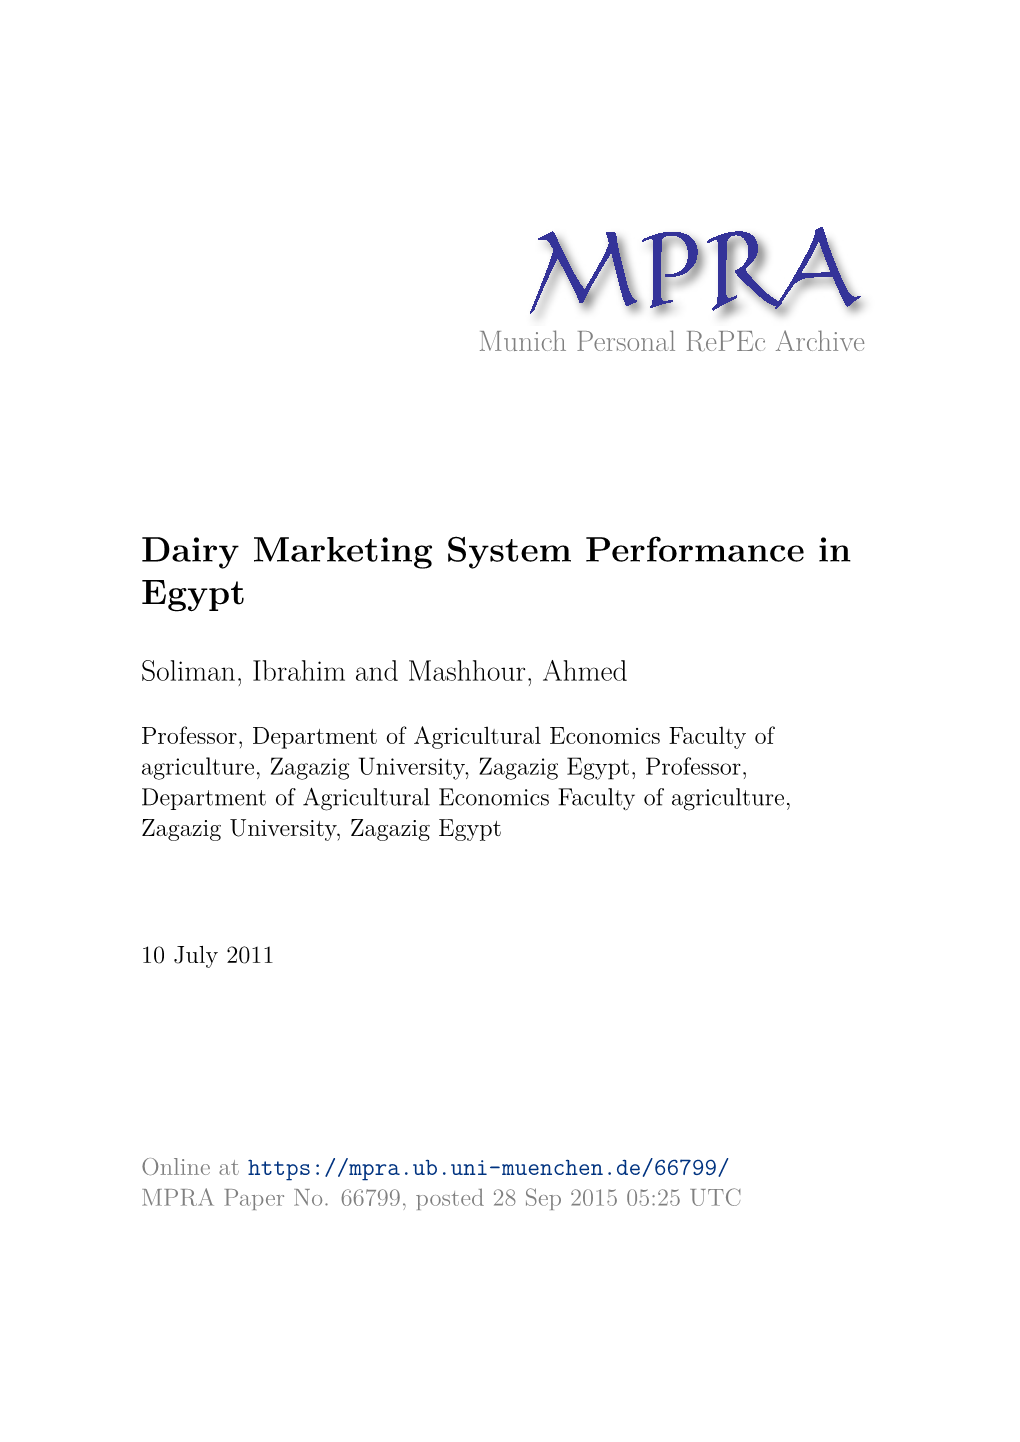 Dairy Marketing System Performance in Egypt